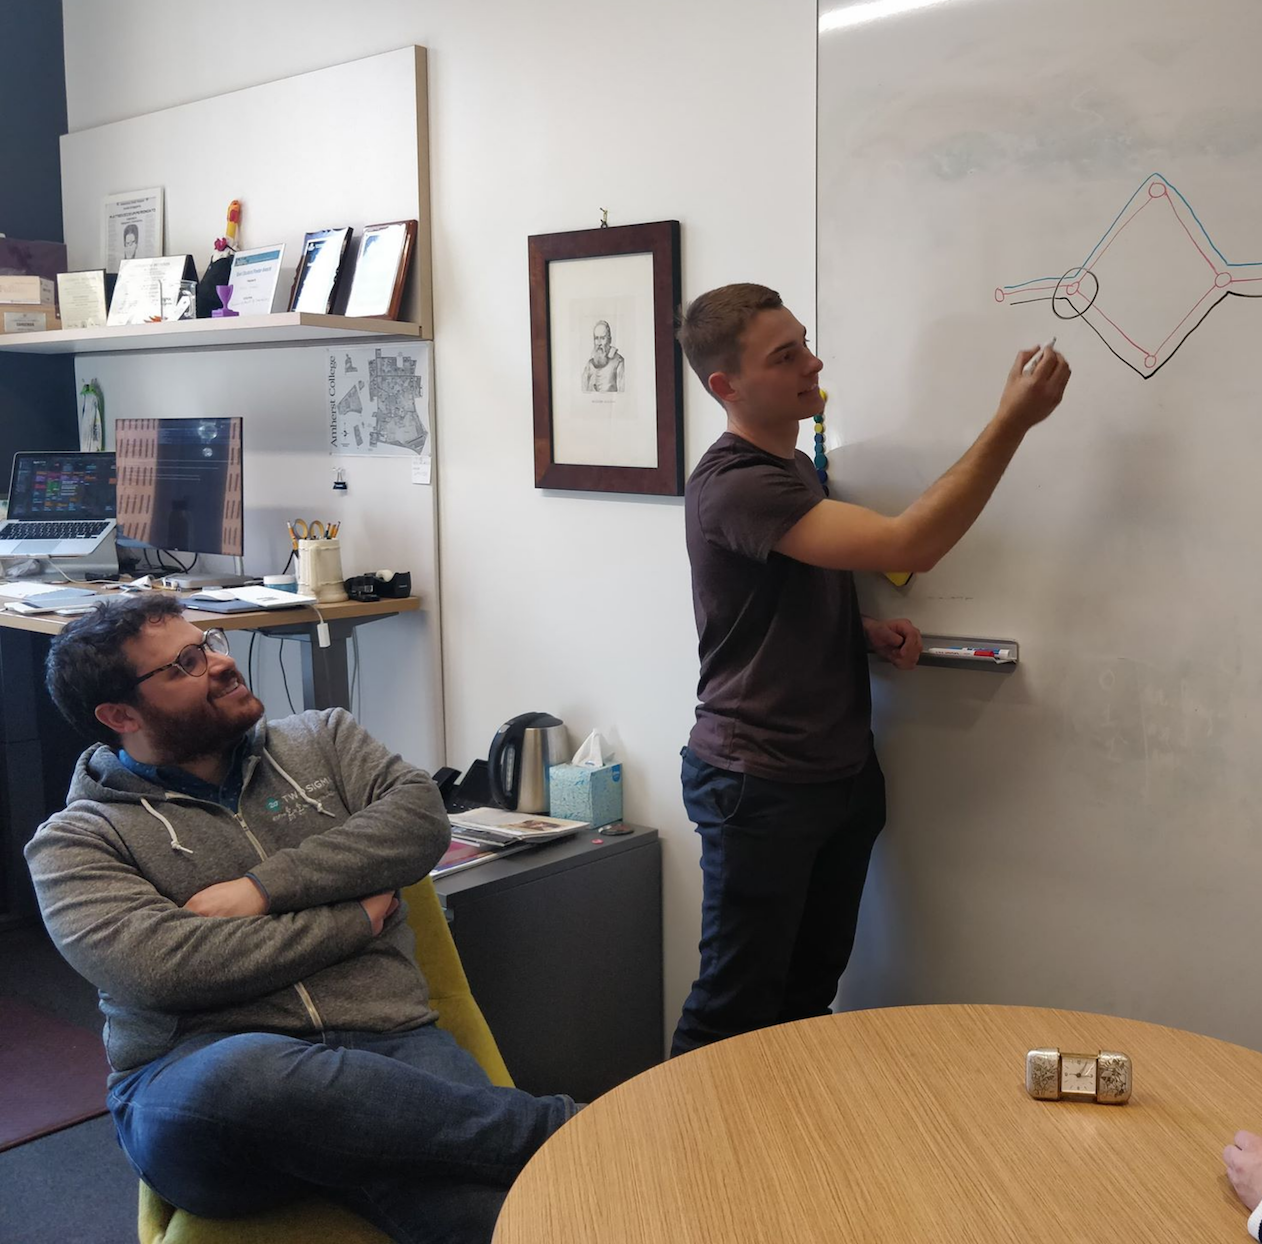 Data* Mammoths at work: Matteo and Conrad working on graph algorithms at the whiteboard